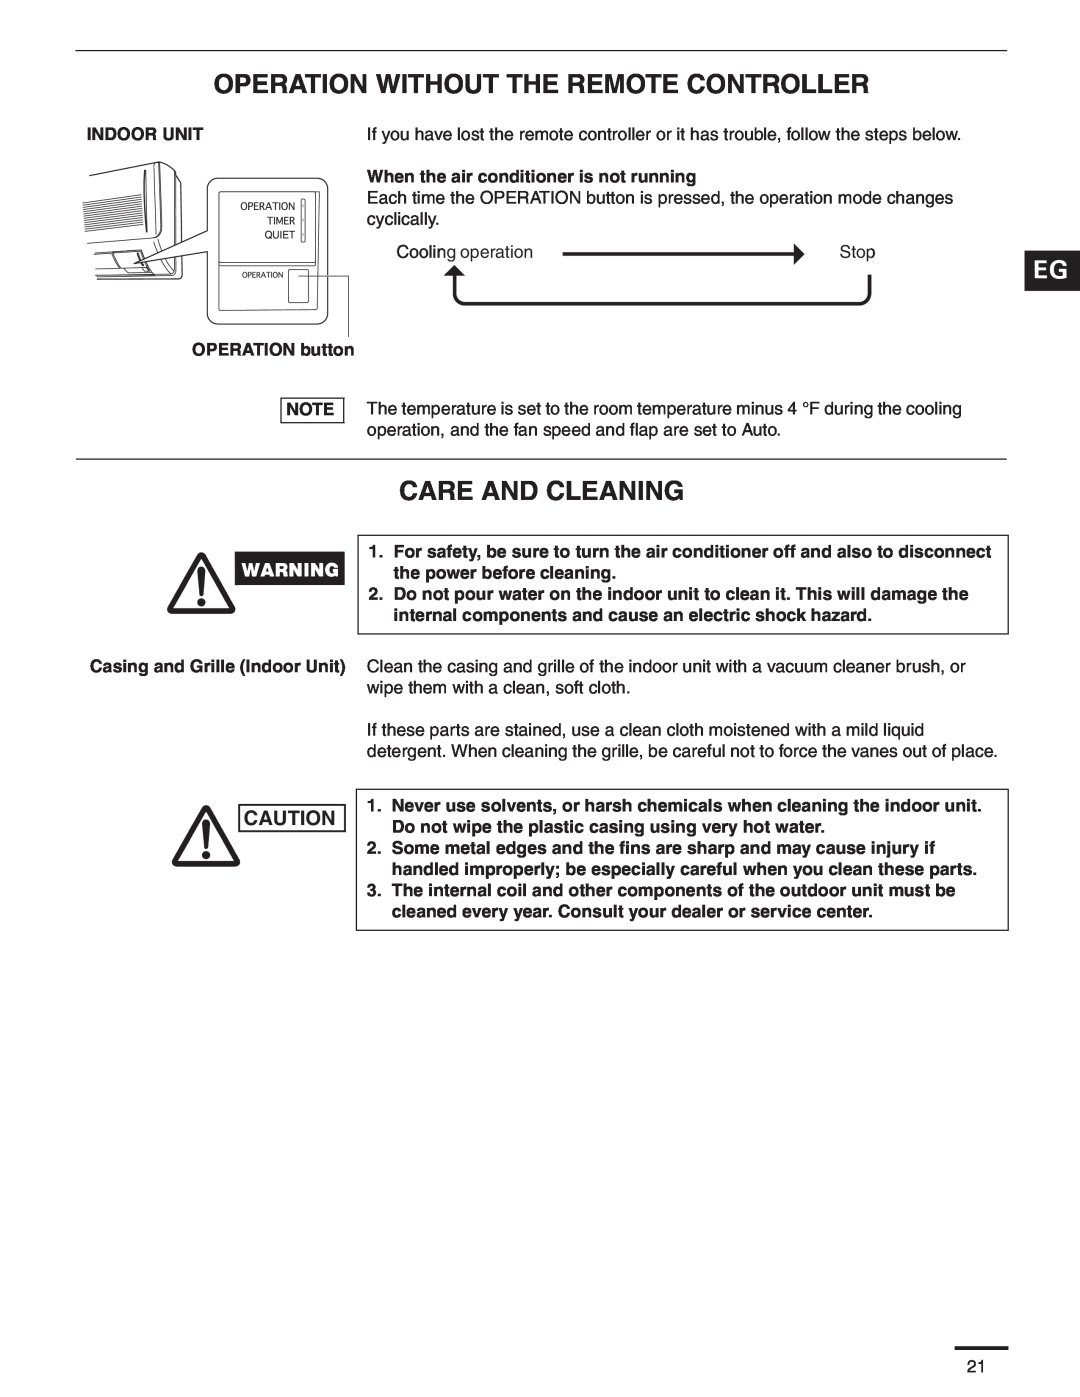 Panasonic CS-KS24NKU, CU-KS24NKUA service manual Operation Without The Remote Controller, Care And Cleaning 